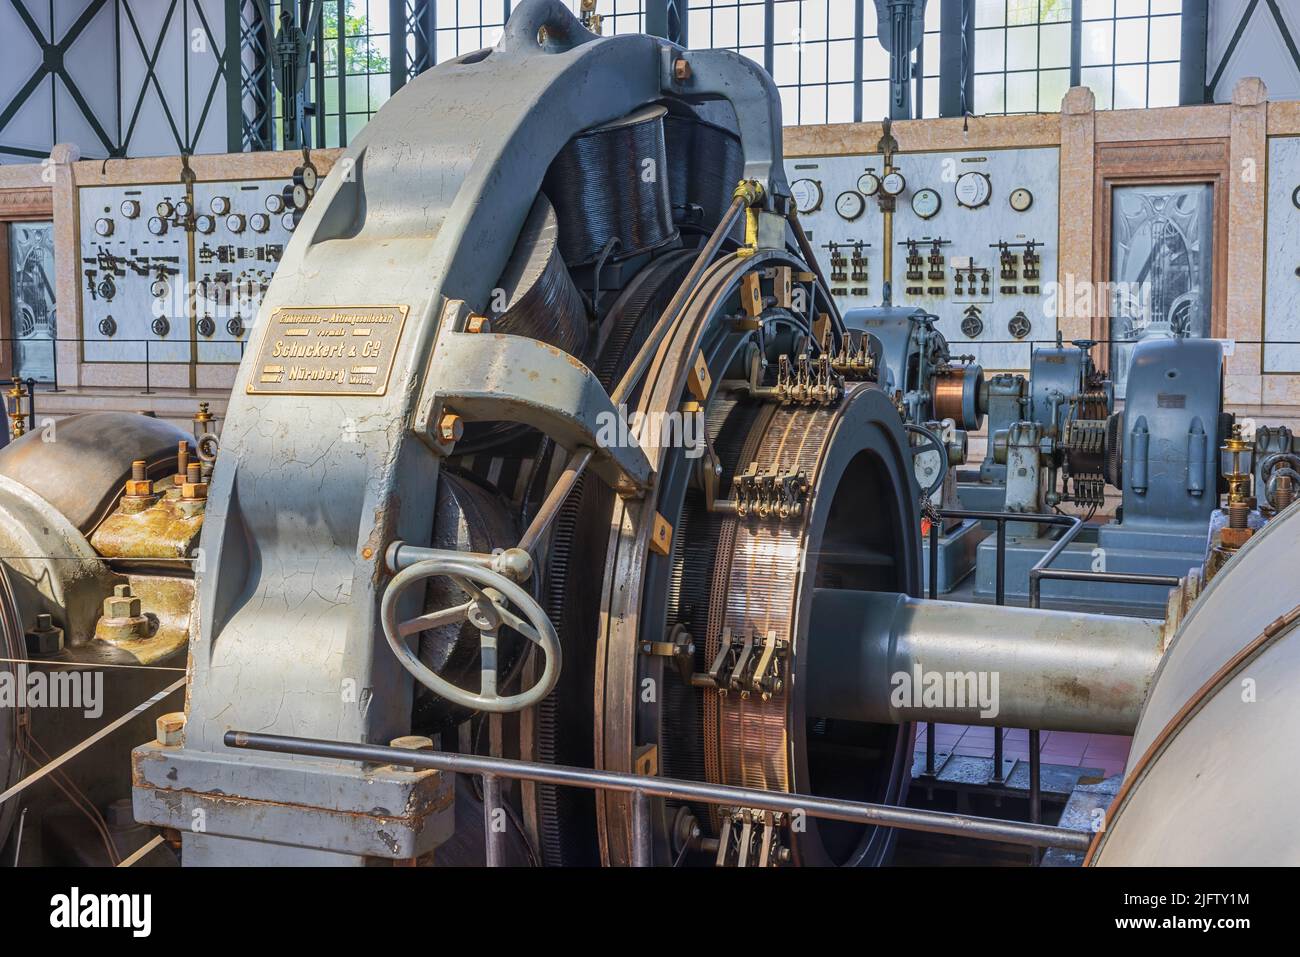 Editorial: DORTMUND, NORTH RHINE-WESTPHALIA, GERMANY, MAY 22, 2022 - Electrical machines in the engine house of the Zollern Colliery Stock Photo